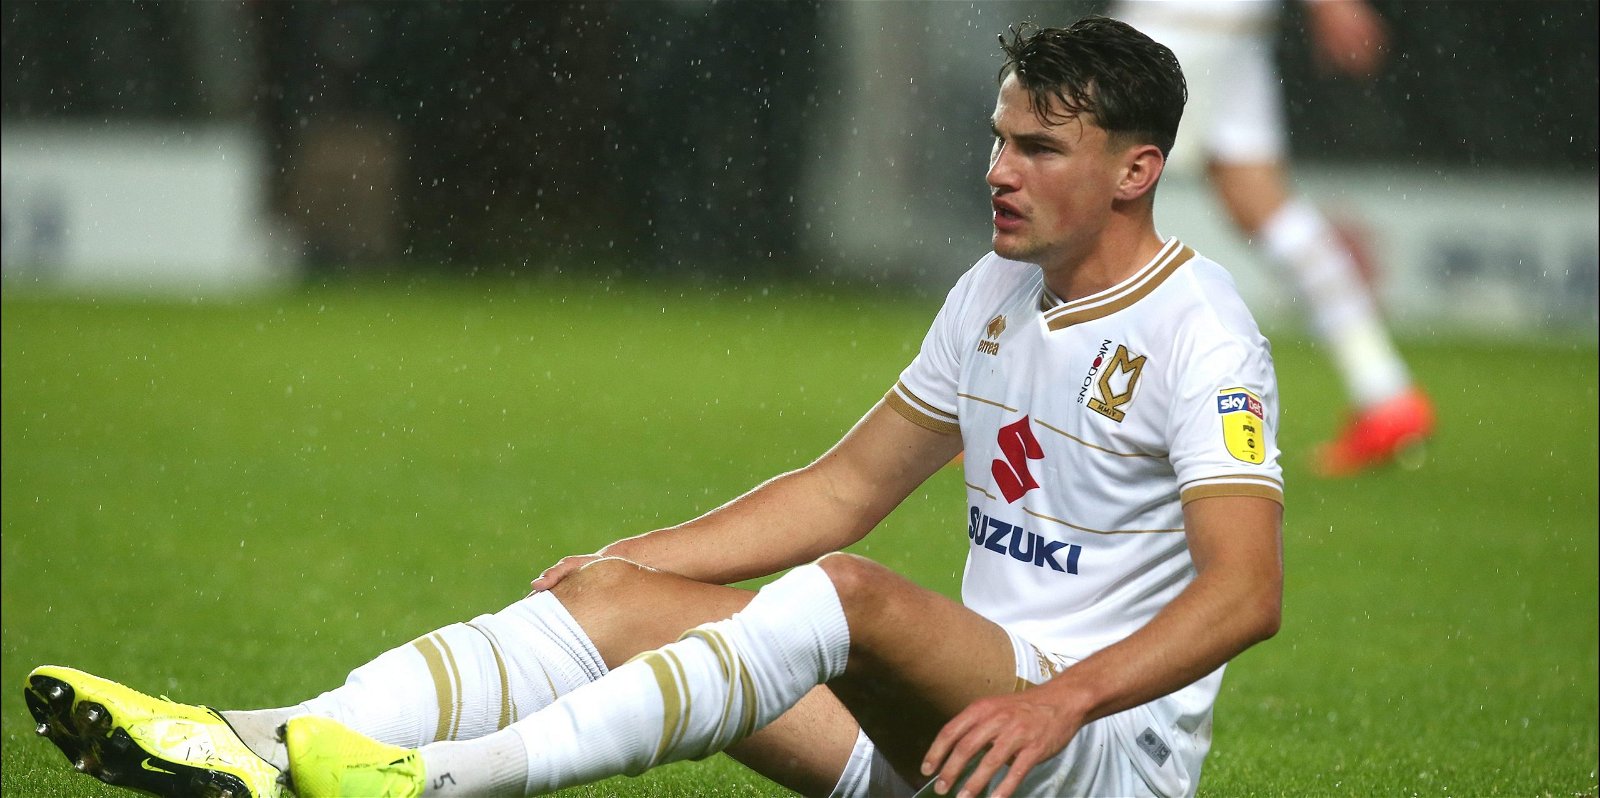 Poole, &#8216;Things are definitely on the up&#8217; &#8211; Regan Poole on future of MK Dons